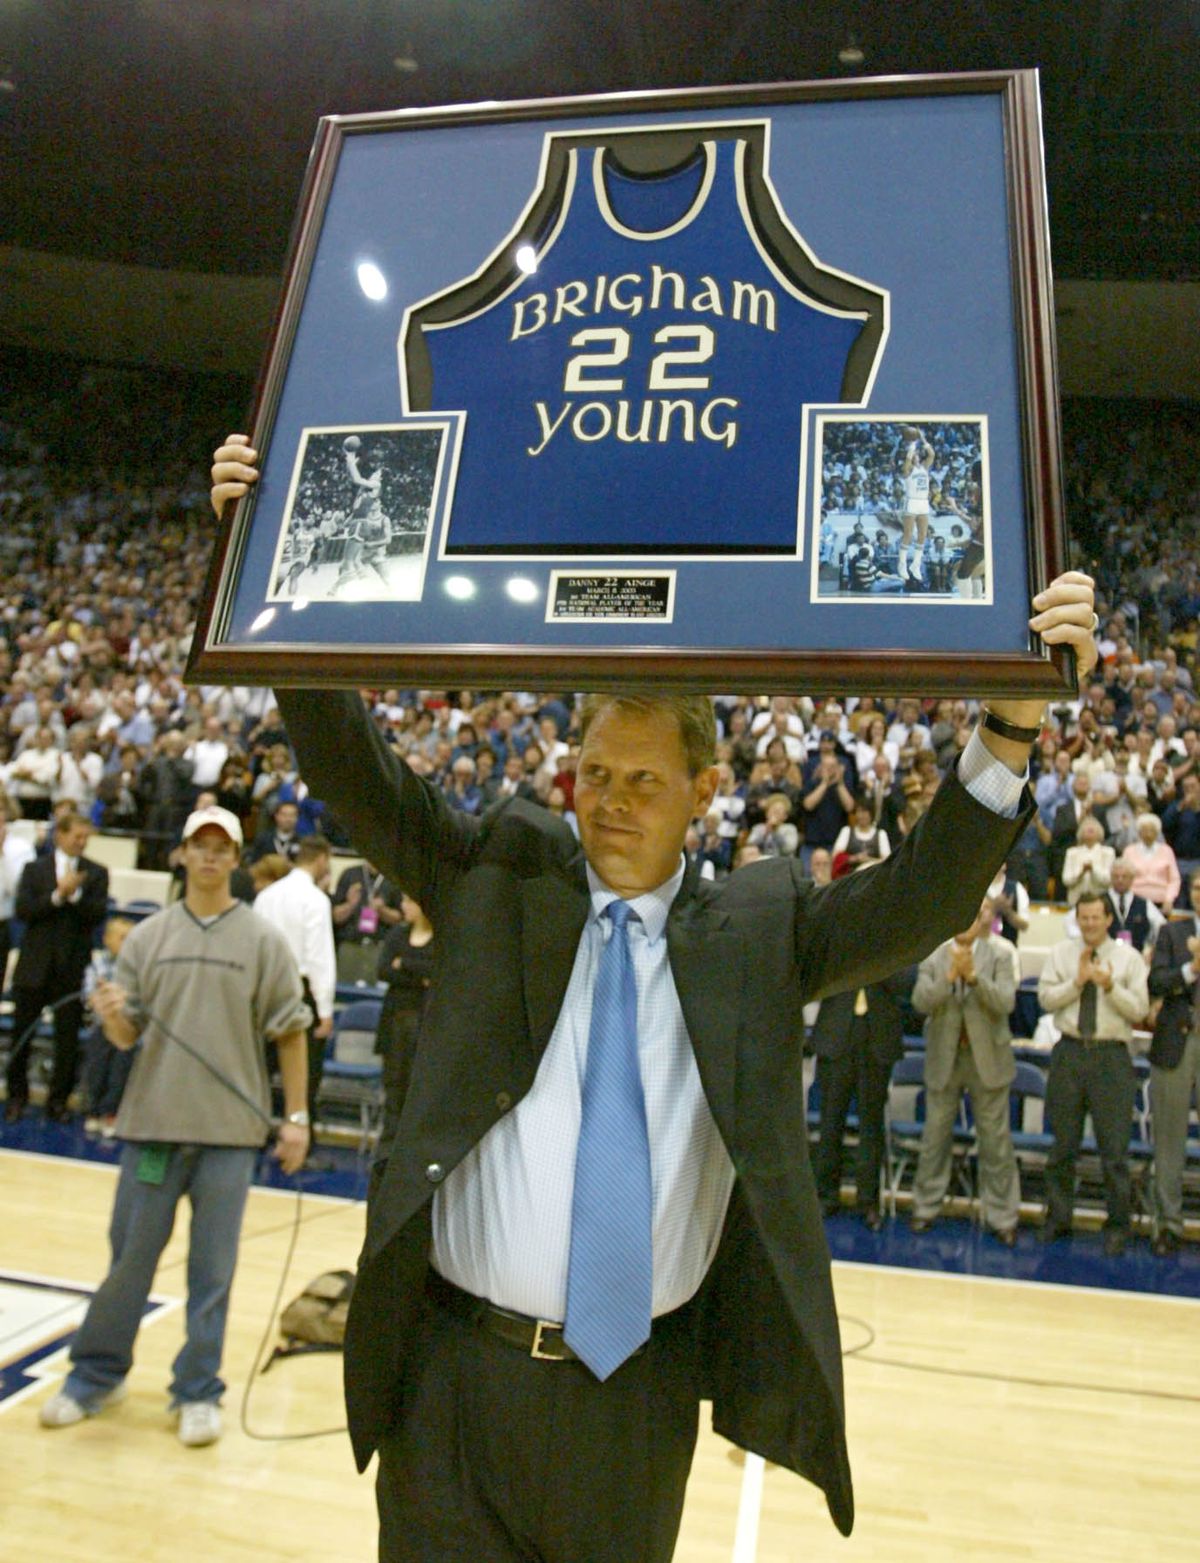 Danny Ainge is author of the most famous play in BYU basketball history.